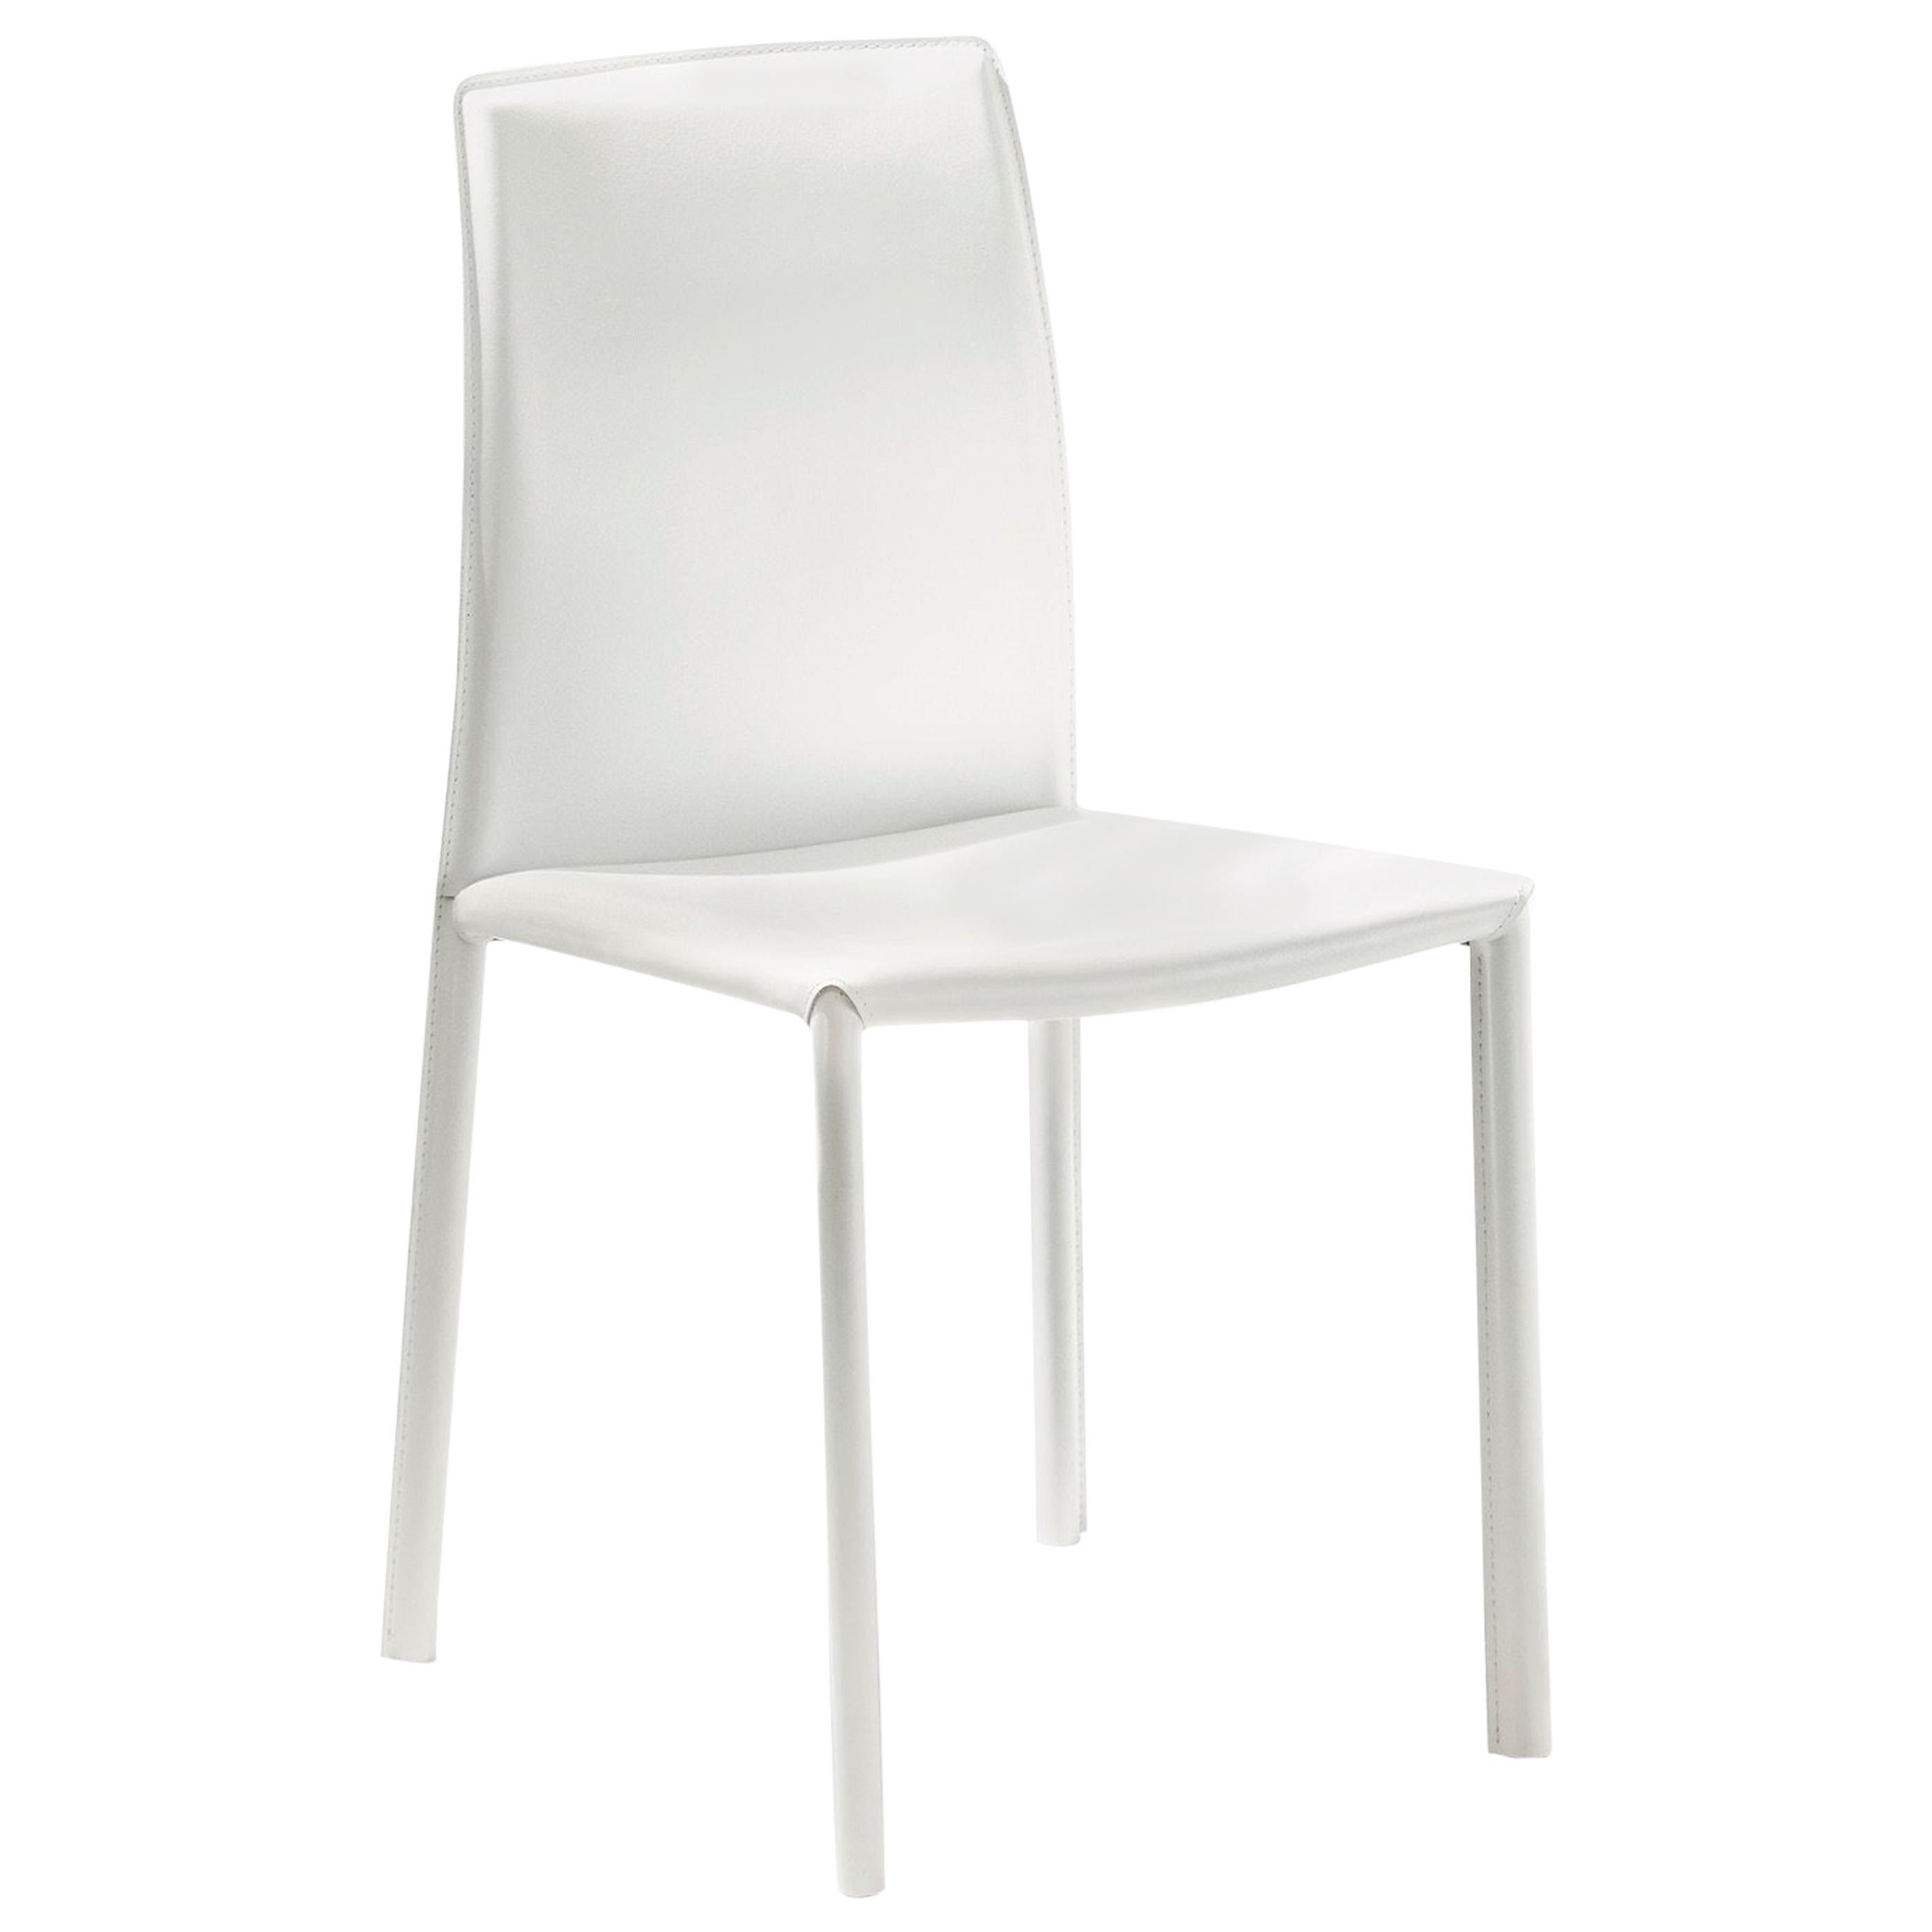 Dafne Chair in White Metal and Leather by Studio Tecnico Pacini & Cappellini For Sale